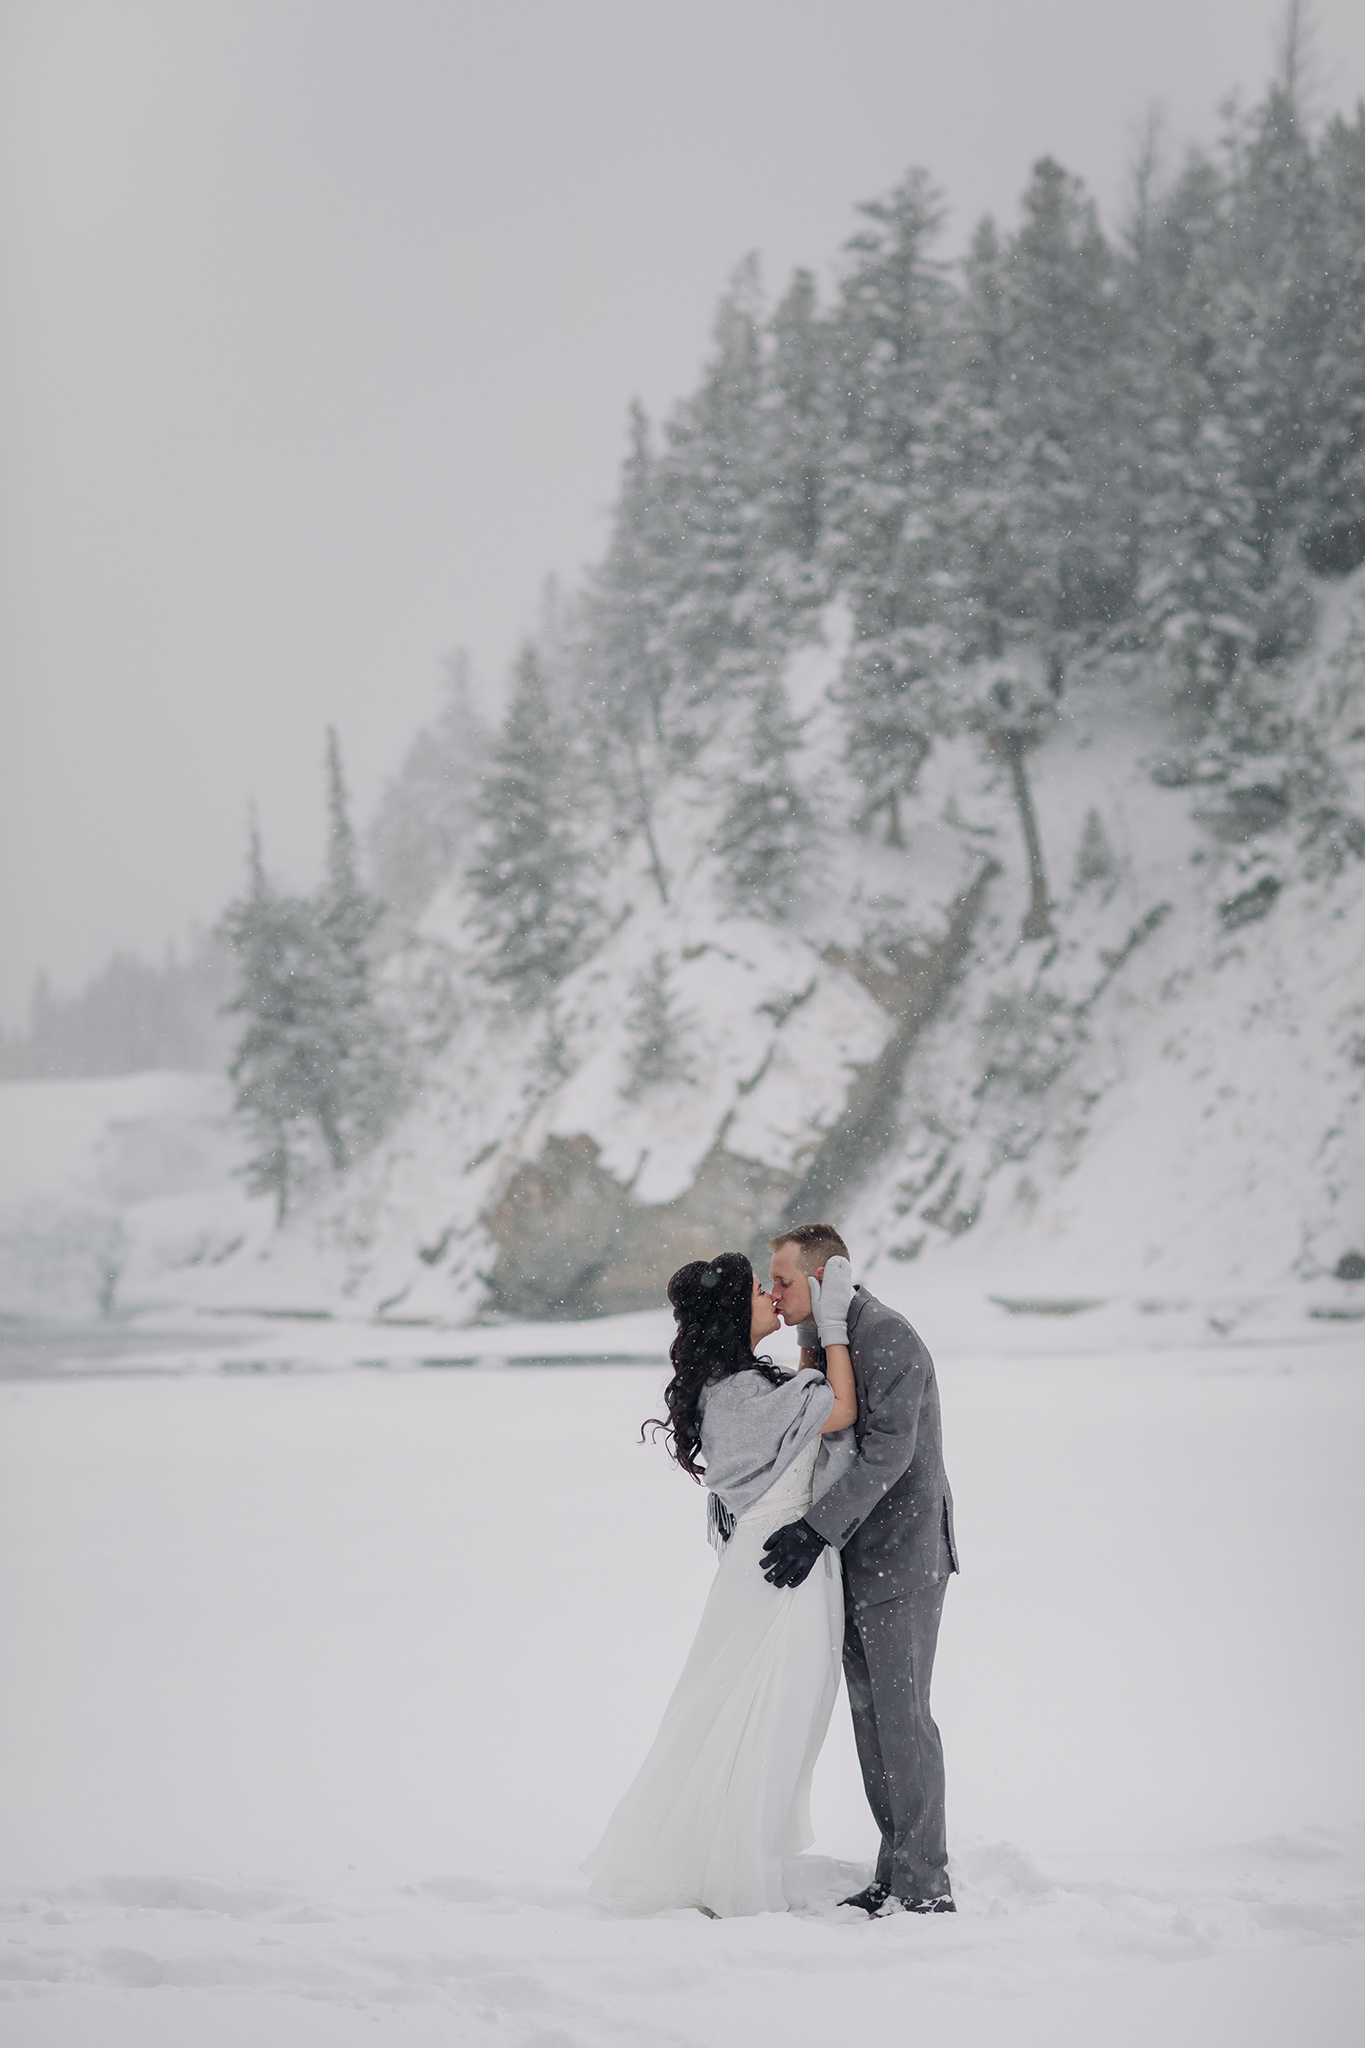 winter wedding portraits at Bow Falls in a snow storm in Banff National Park in the Canadian Rocky Mountains photographed by ENV Photography